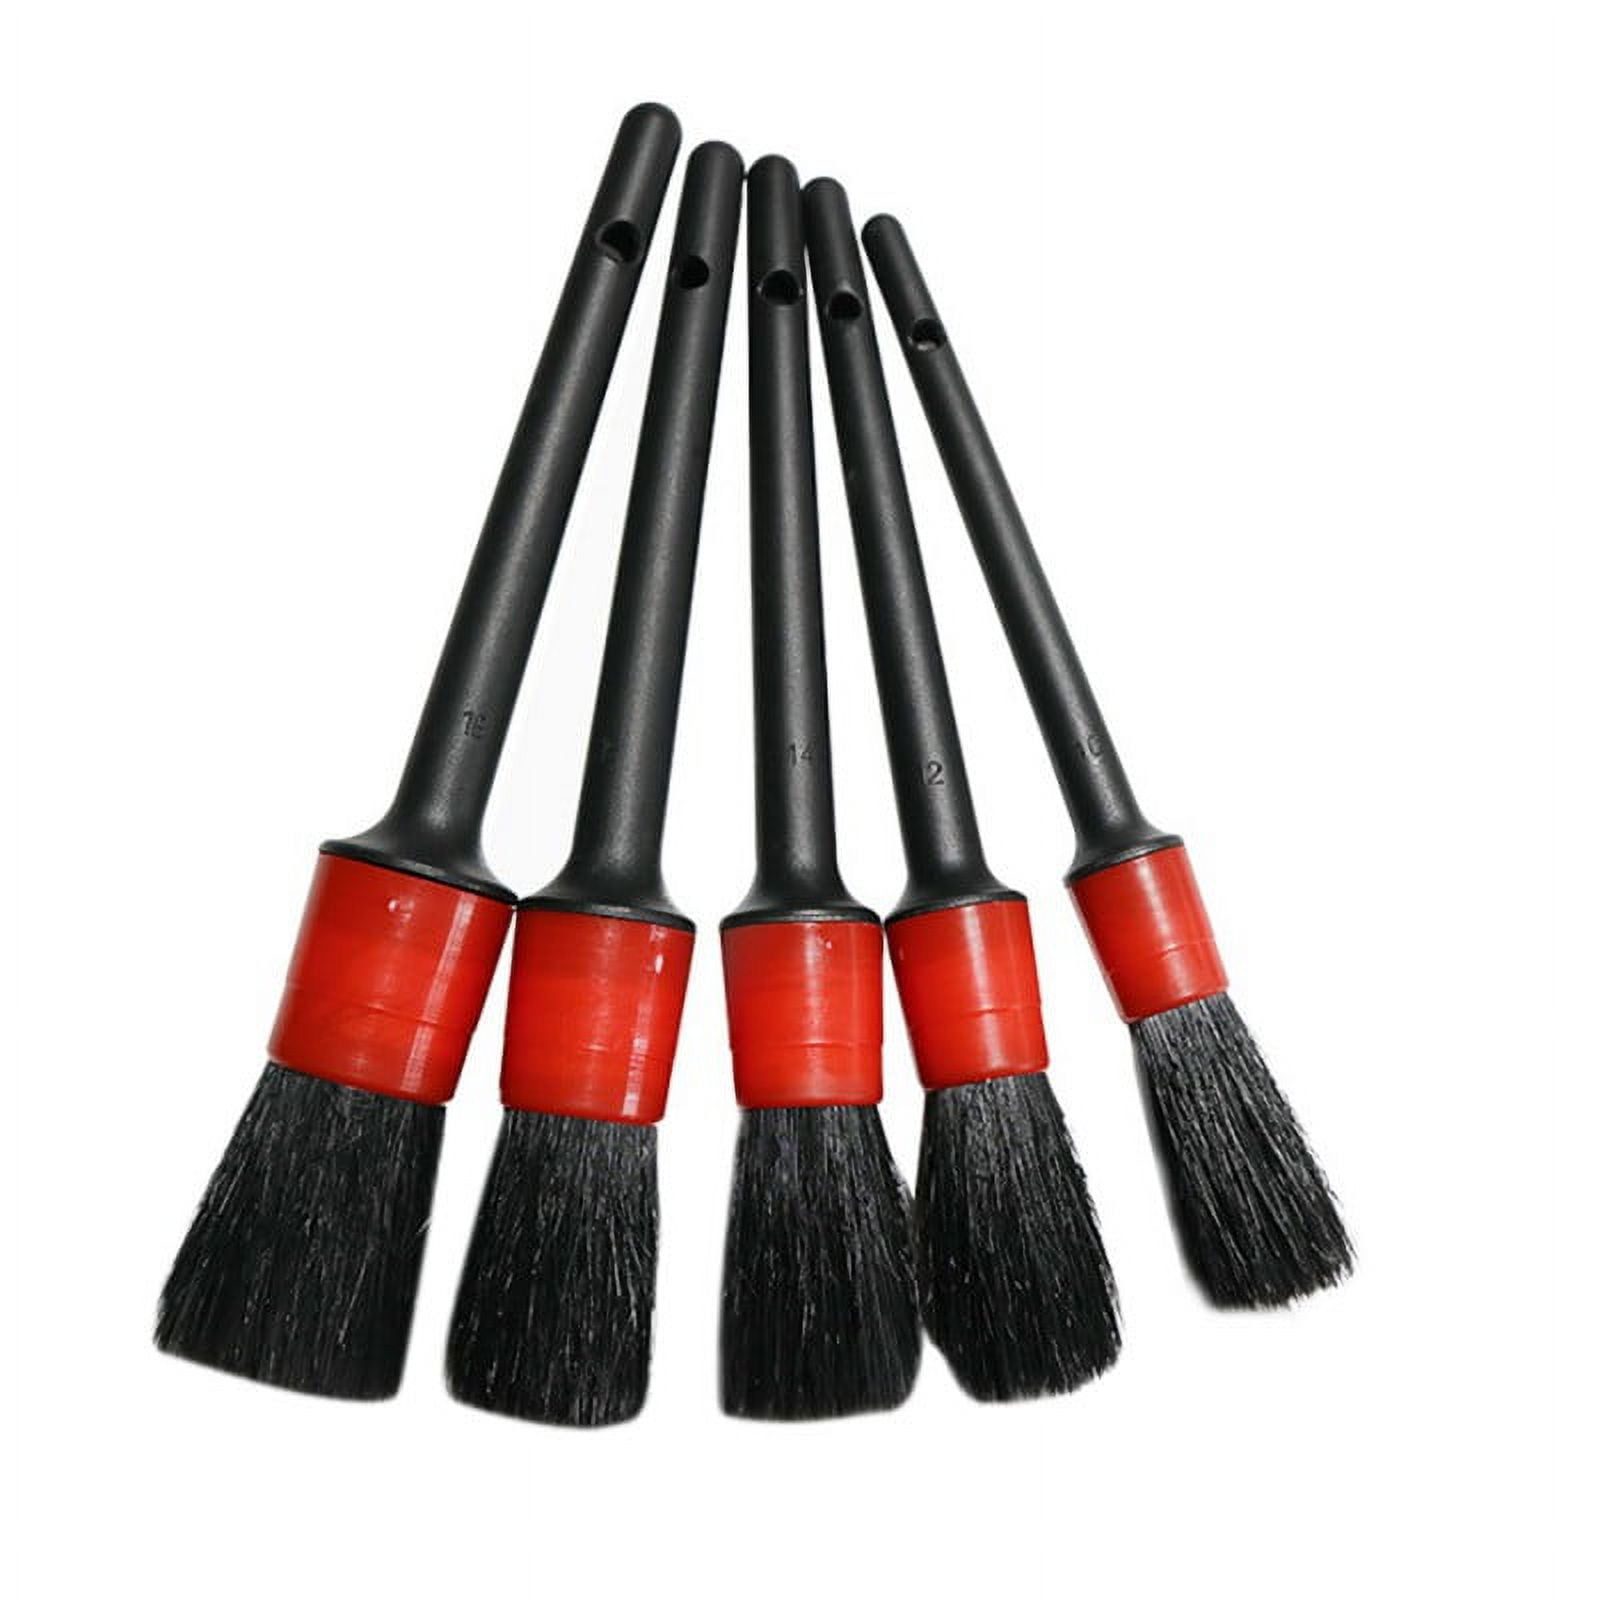 Lucullan Super Dense Natural Boar's Hair Premium Cleaning Brushes For Small  Spaces,Engine Bays,Exterior Detailing - AliExpress